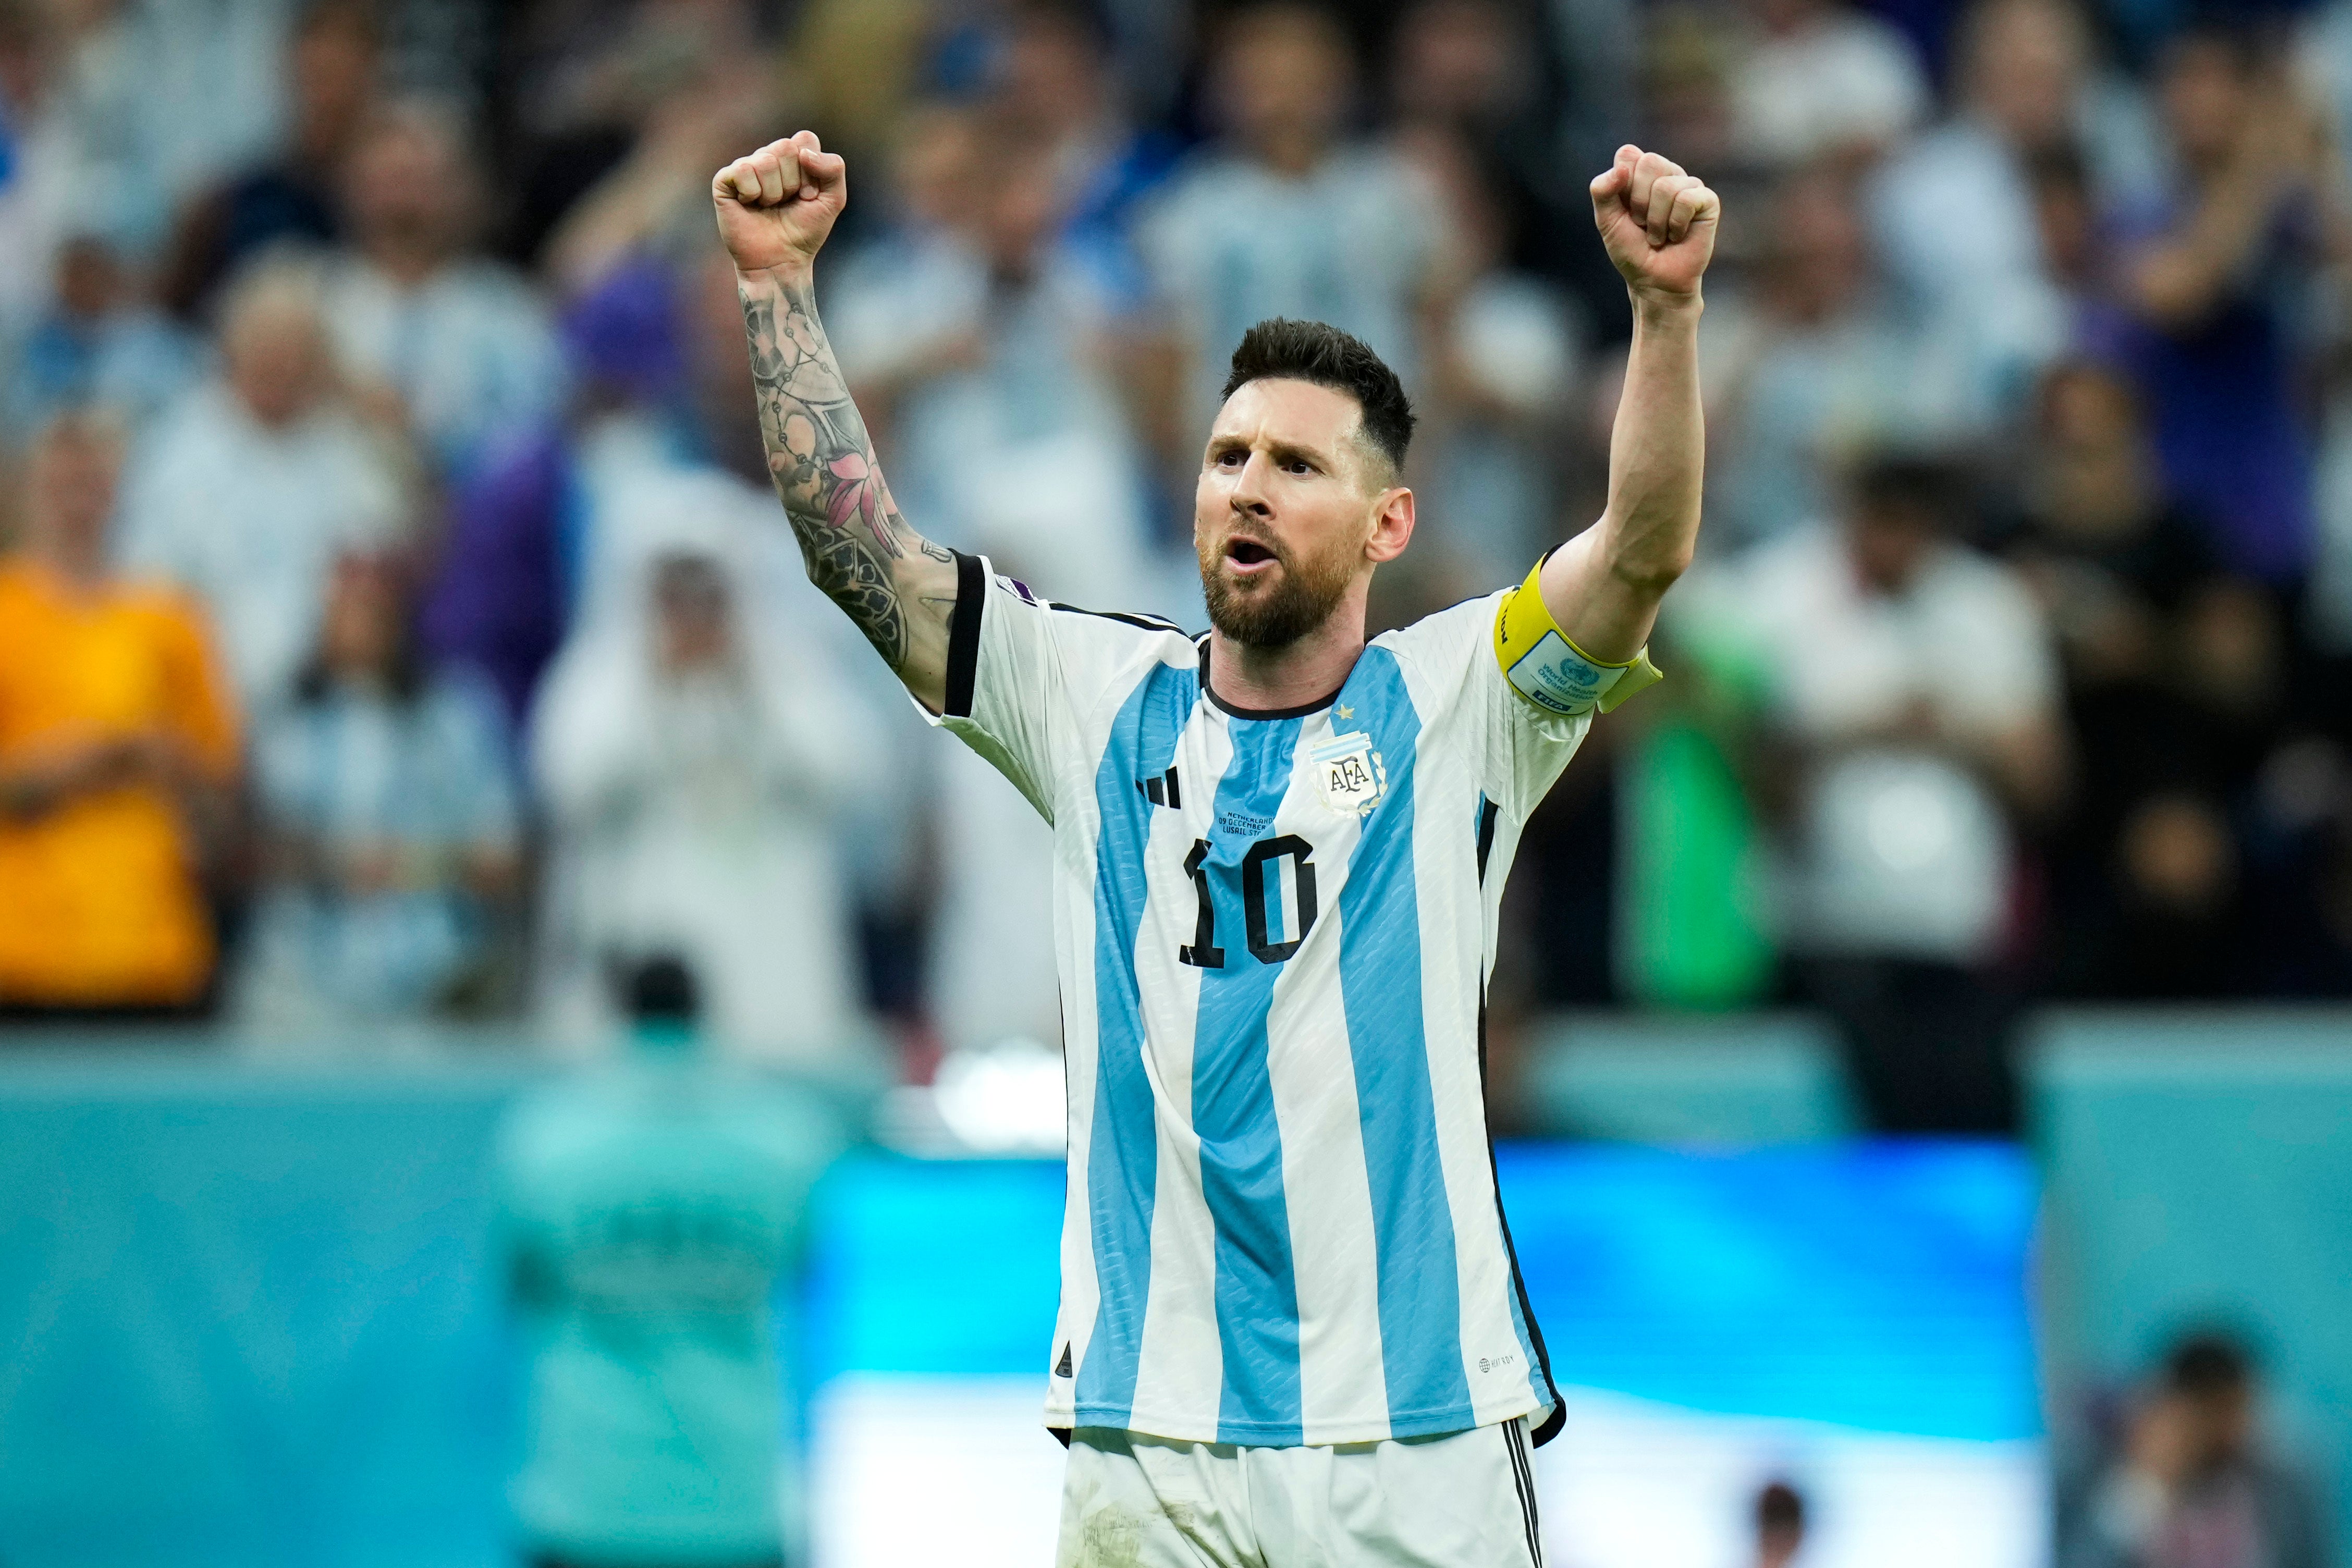 This is Lionel Messi’s last attempt at winning the World Cup